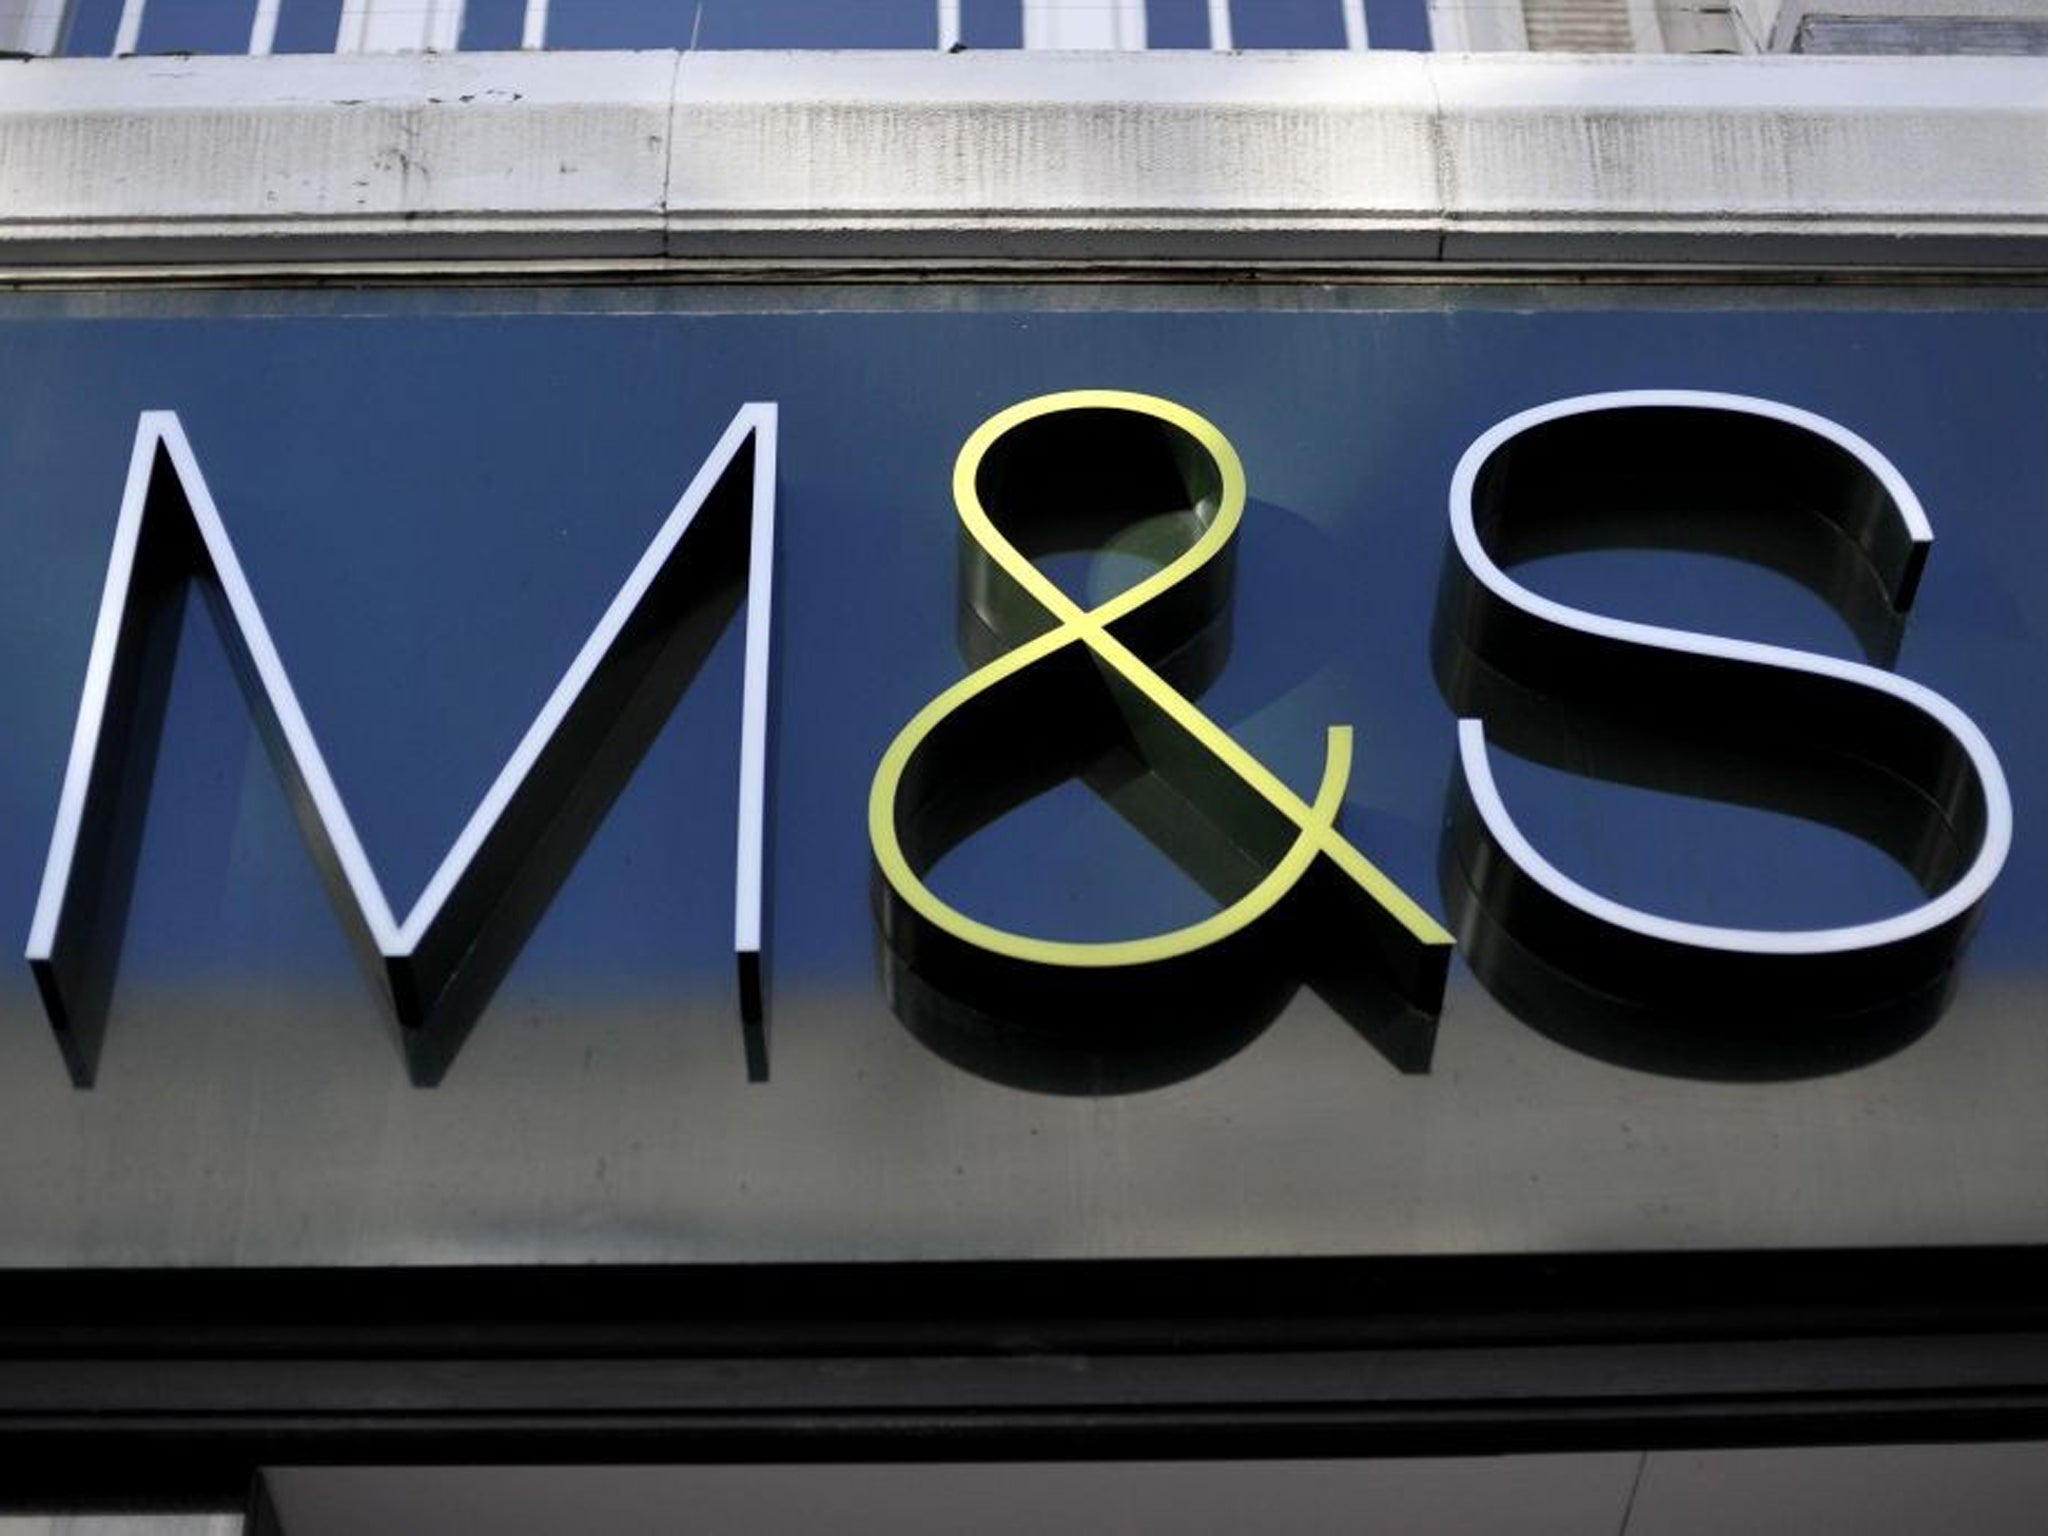 Marks & Spencer's decline in like-for-like sales of 1.6 per cent for the 13 weeks to the end of June was broadly in line with expectations